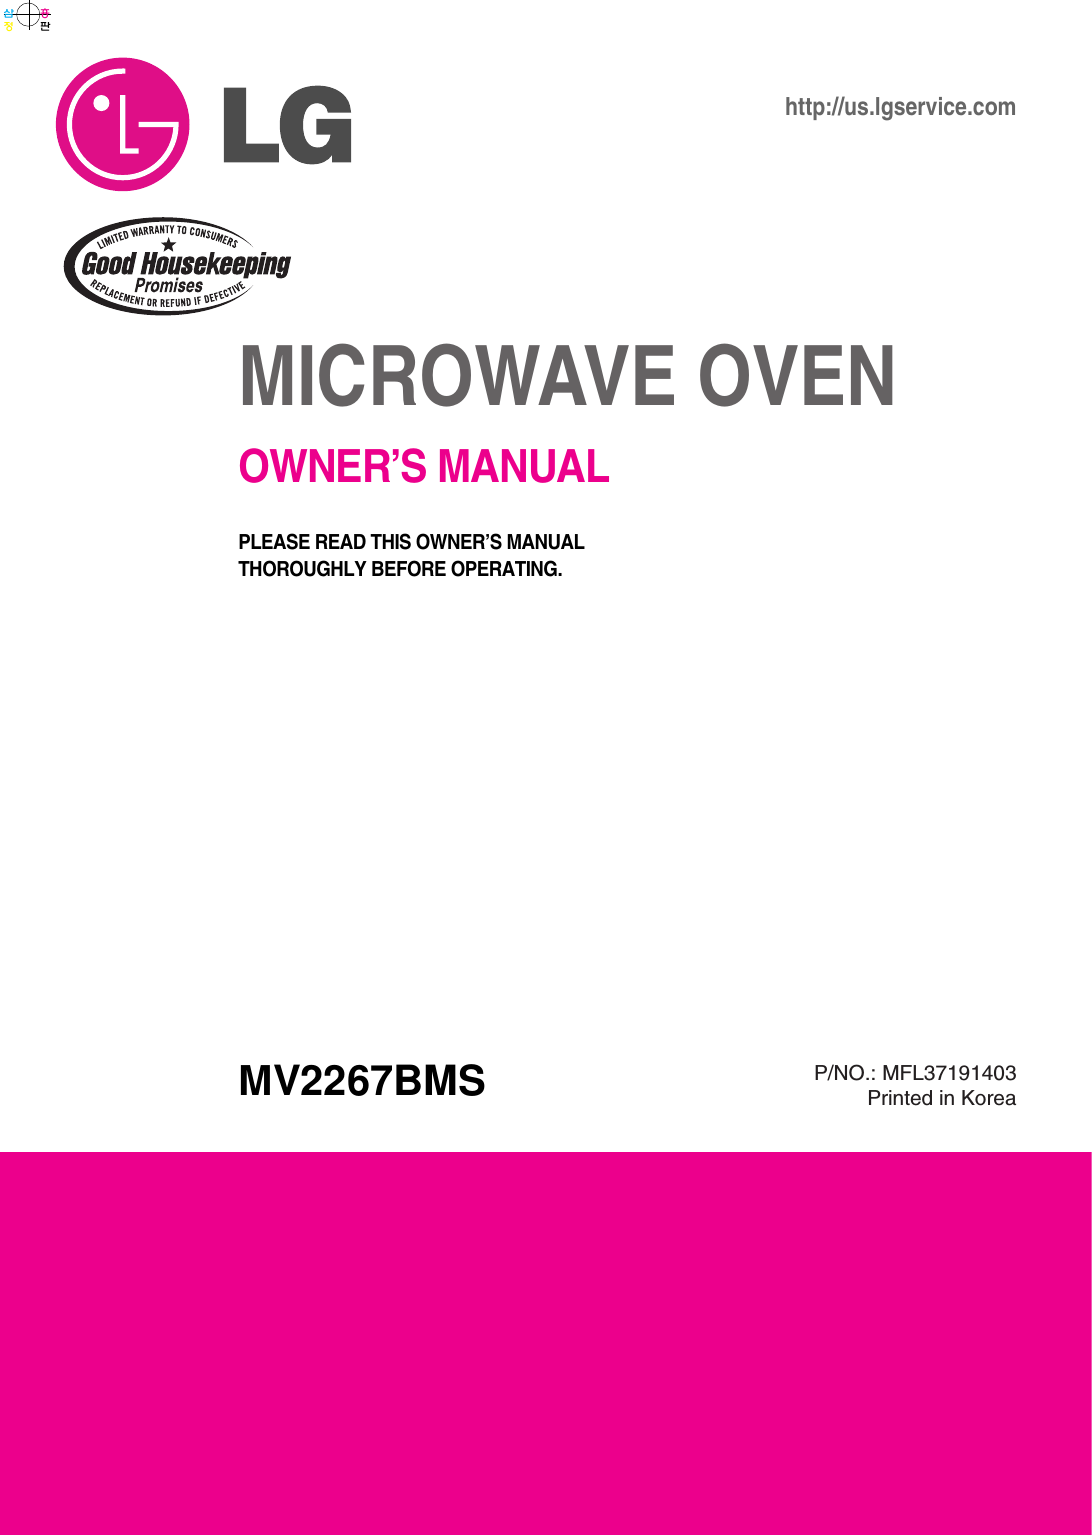 MICROWAVE OVENOWNER’S MANUALMV2267BMShttp://us.lgservice.comPLEASE READ THIS OWNER’S MANUAL THOROUGHLY BEFORE OPERATING.삼흥정판P/NO.: MFL37191403Printed in Korea